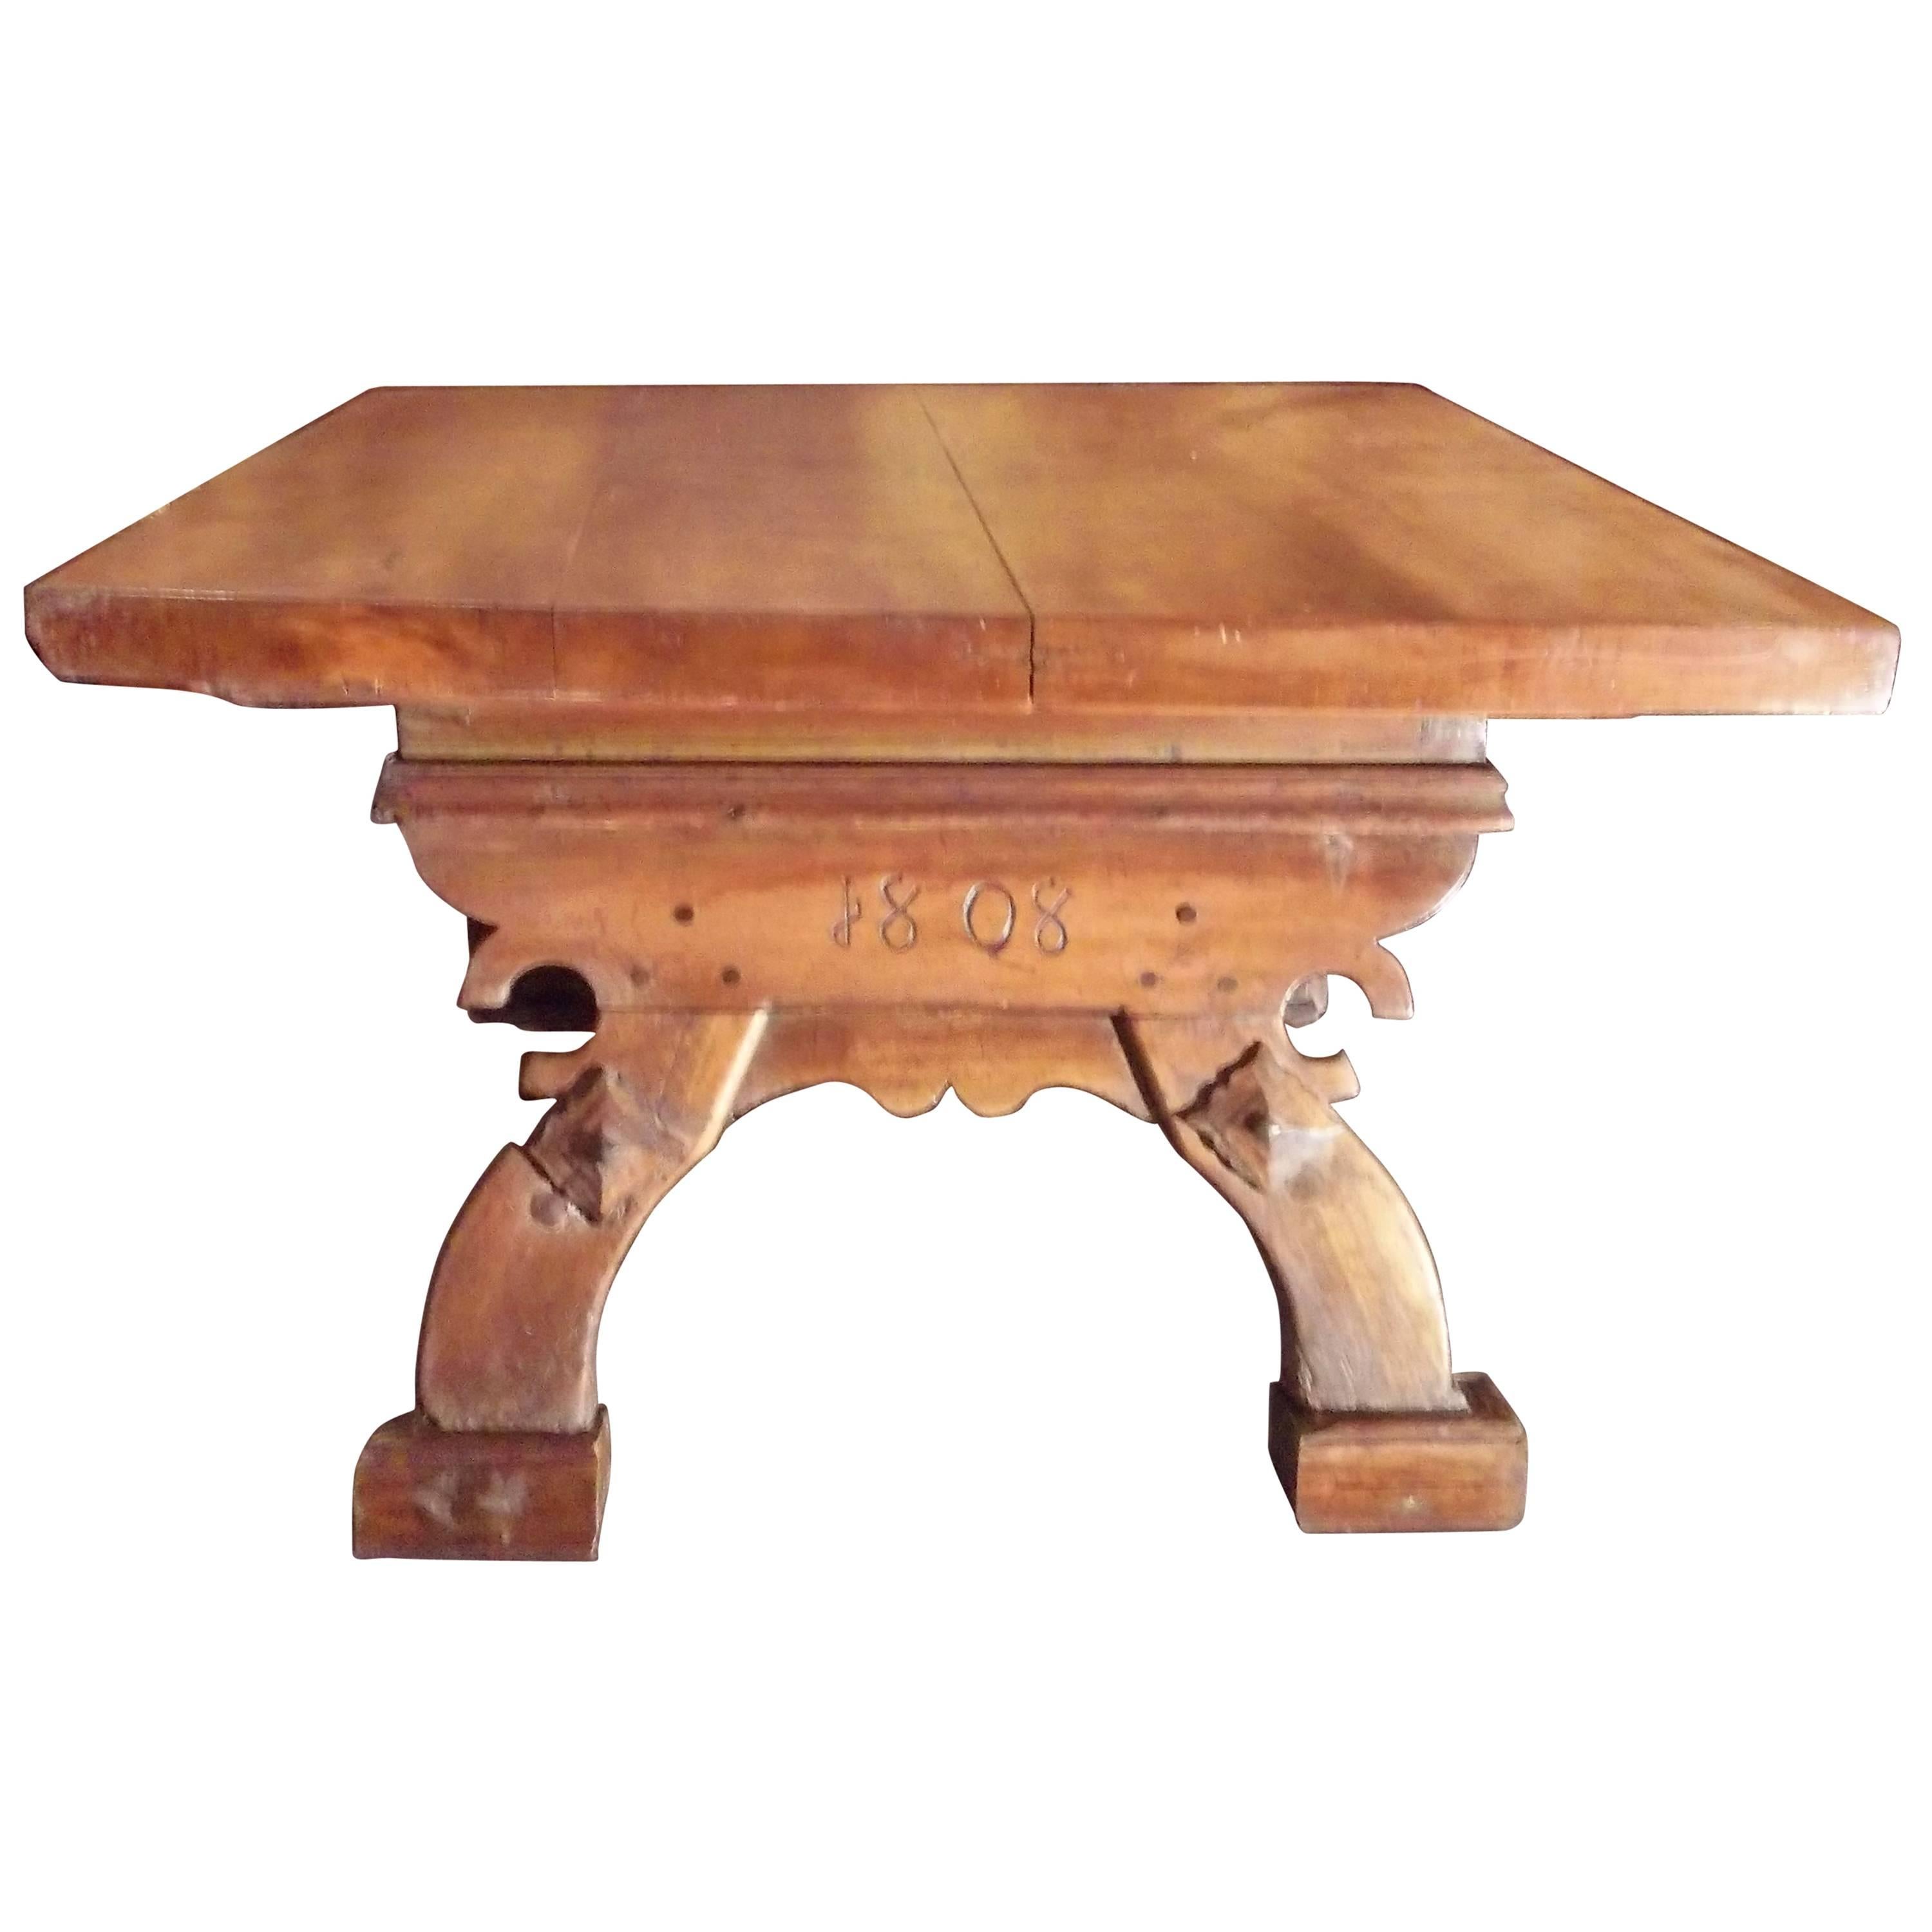 Country or Provincial French Farmhouse or Butcher Table with Date 1808